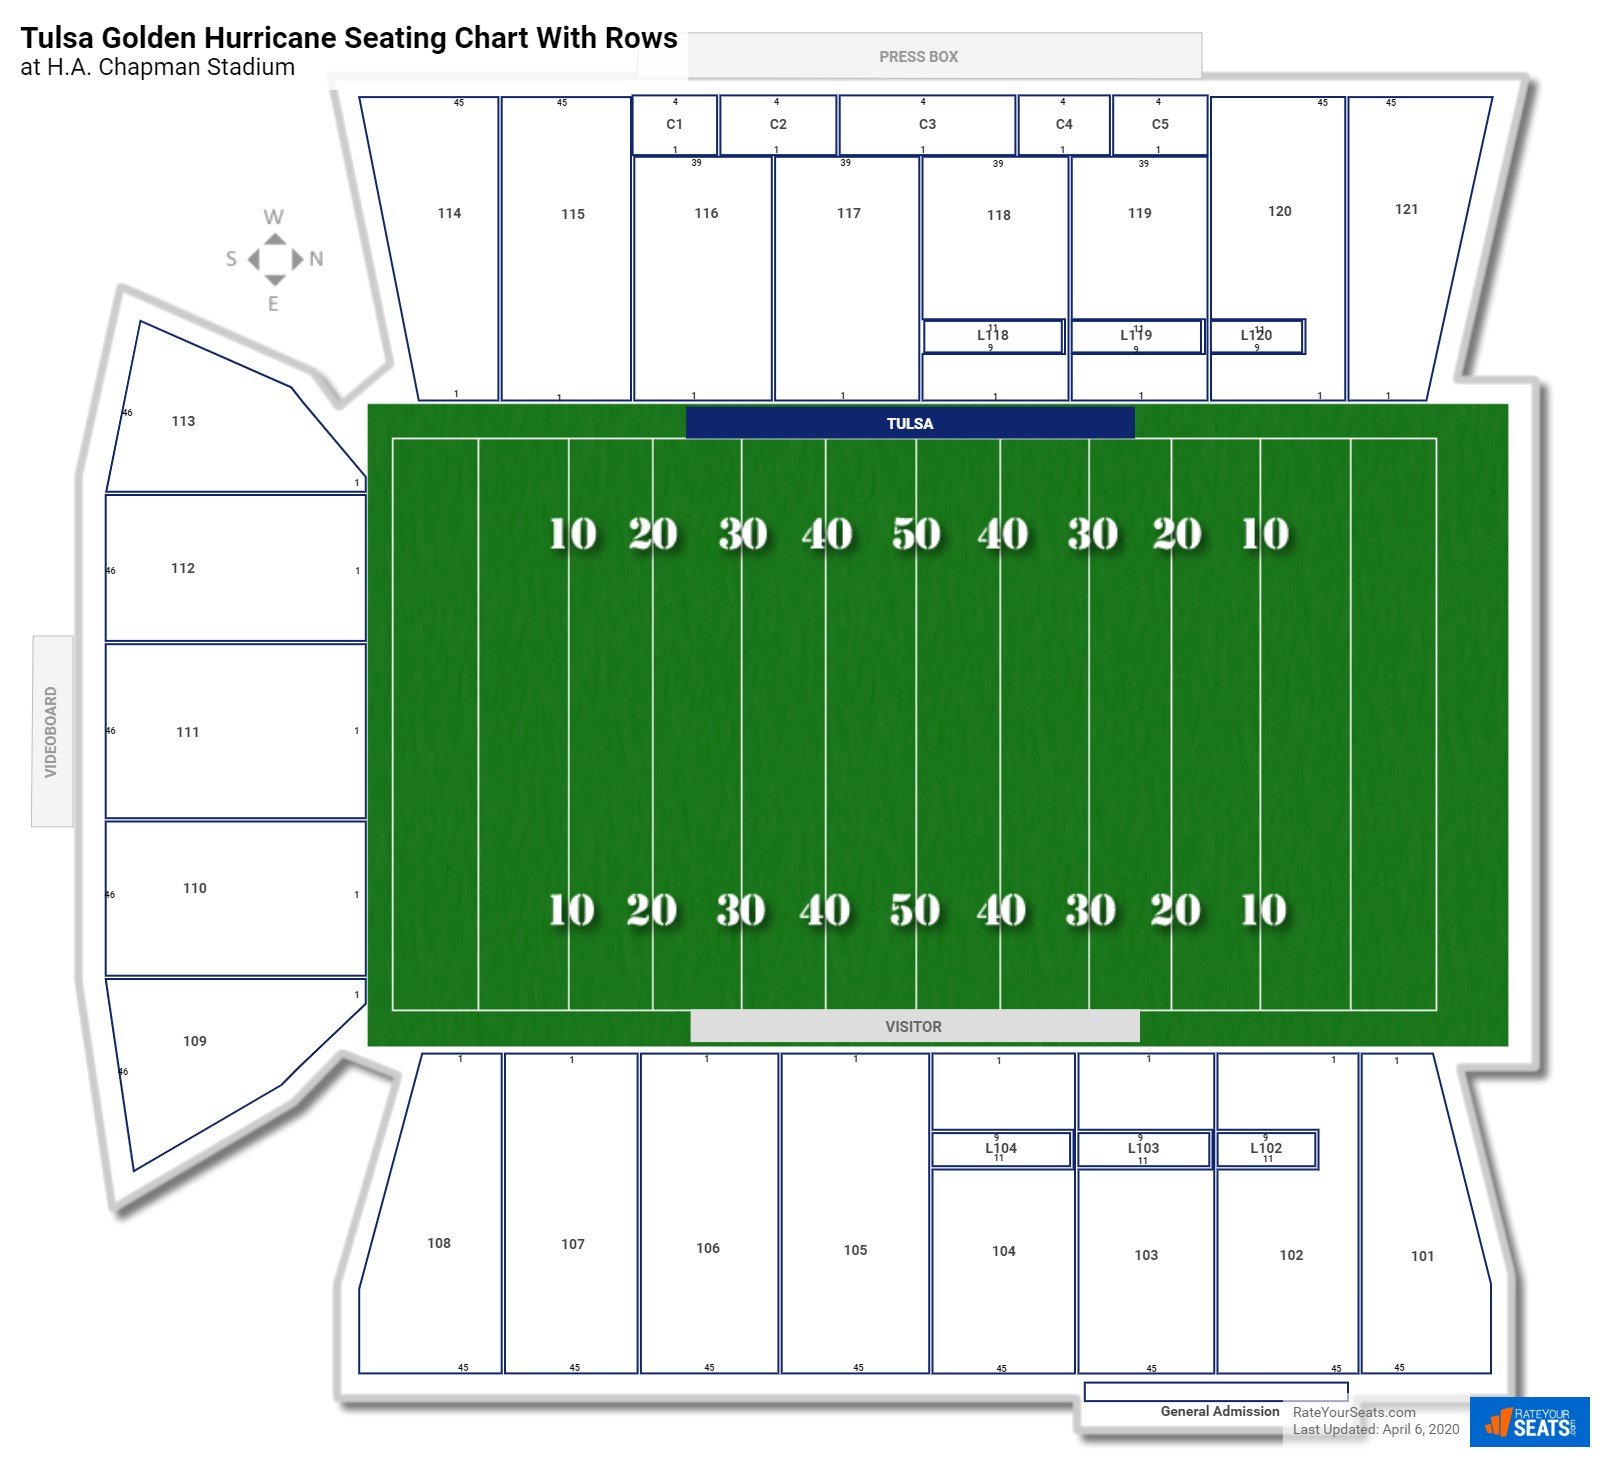 H.A. Chapman Stadium seating chart with row numbers